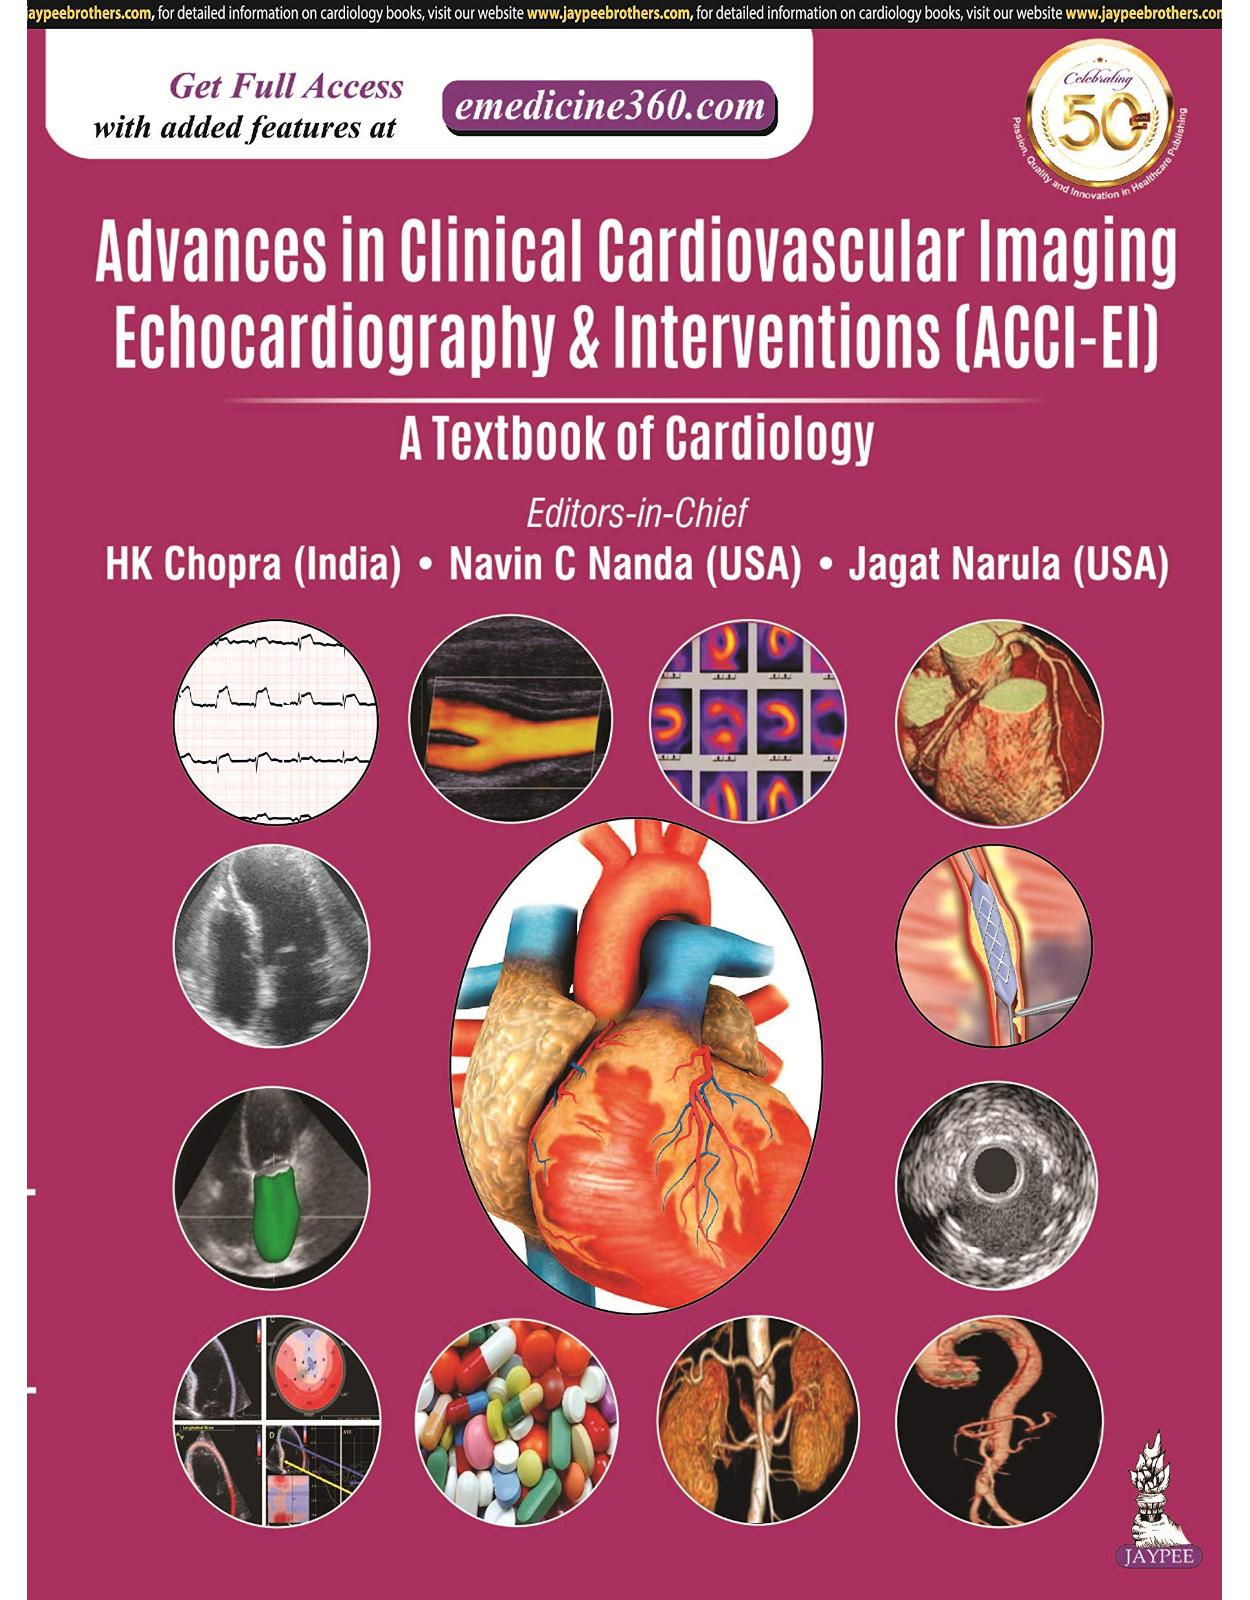 Advances in Clinical Cardiovascular Imaging, Echocardiography & Interventions: A Textbook of Cardiology